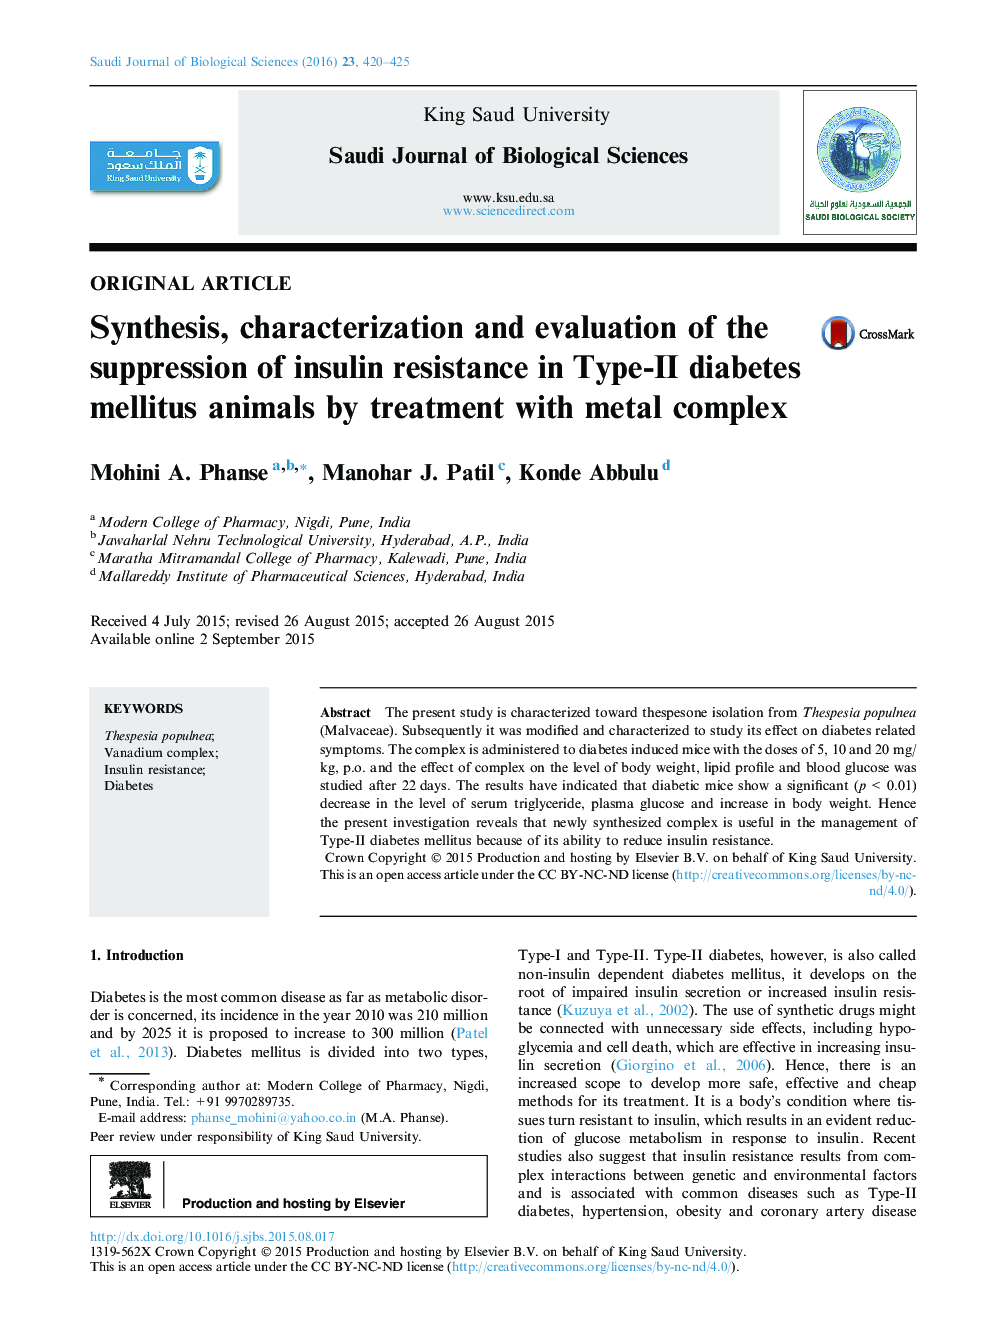 Synthesis, characterization and evaluation of the suppression of insulin resistance in Type-II diabetes mellitus animals by treatment with metal complex 